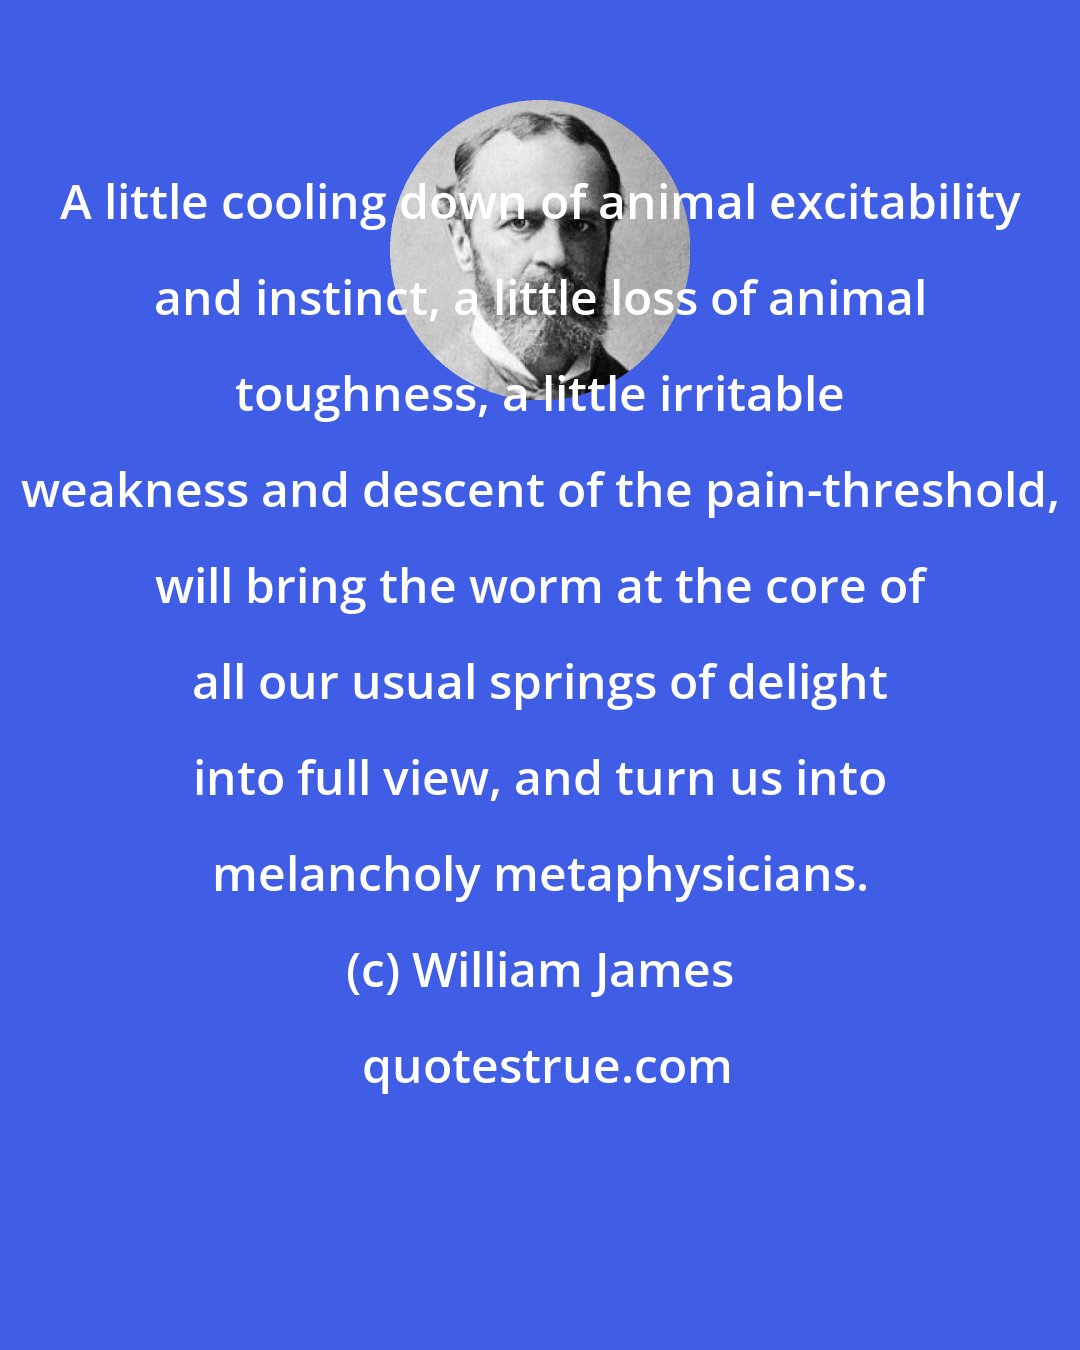 William James: A little cooling down of animal excitability and instinct, a little loss of animal toughness, a little irritable weakness and descent of the pain-threshold, will bring the worm at the core of all our usual springs of delight into full view, and turn us into melancholy metaphysicians.